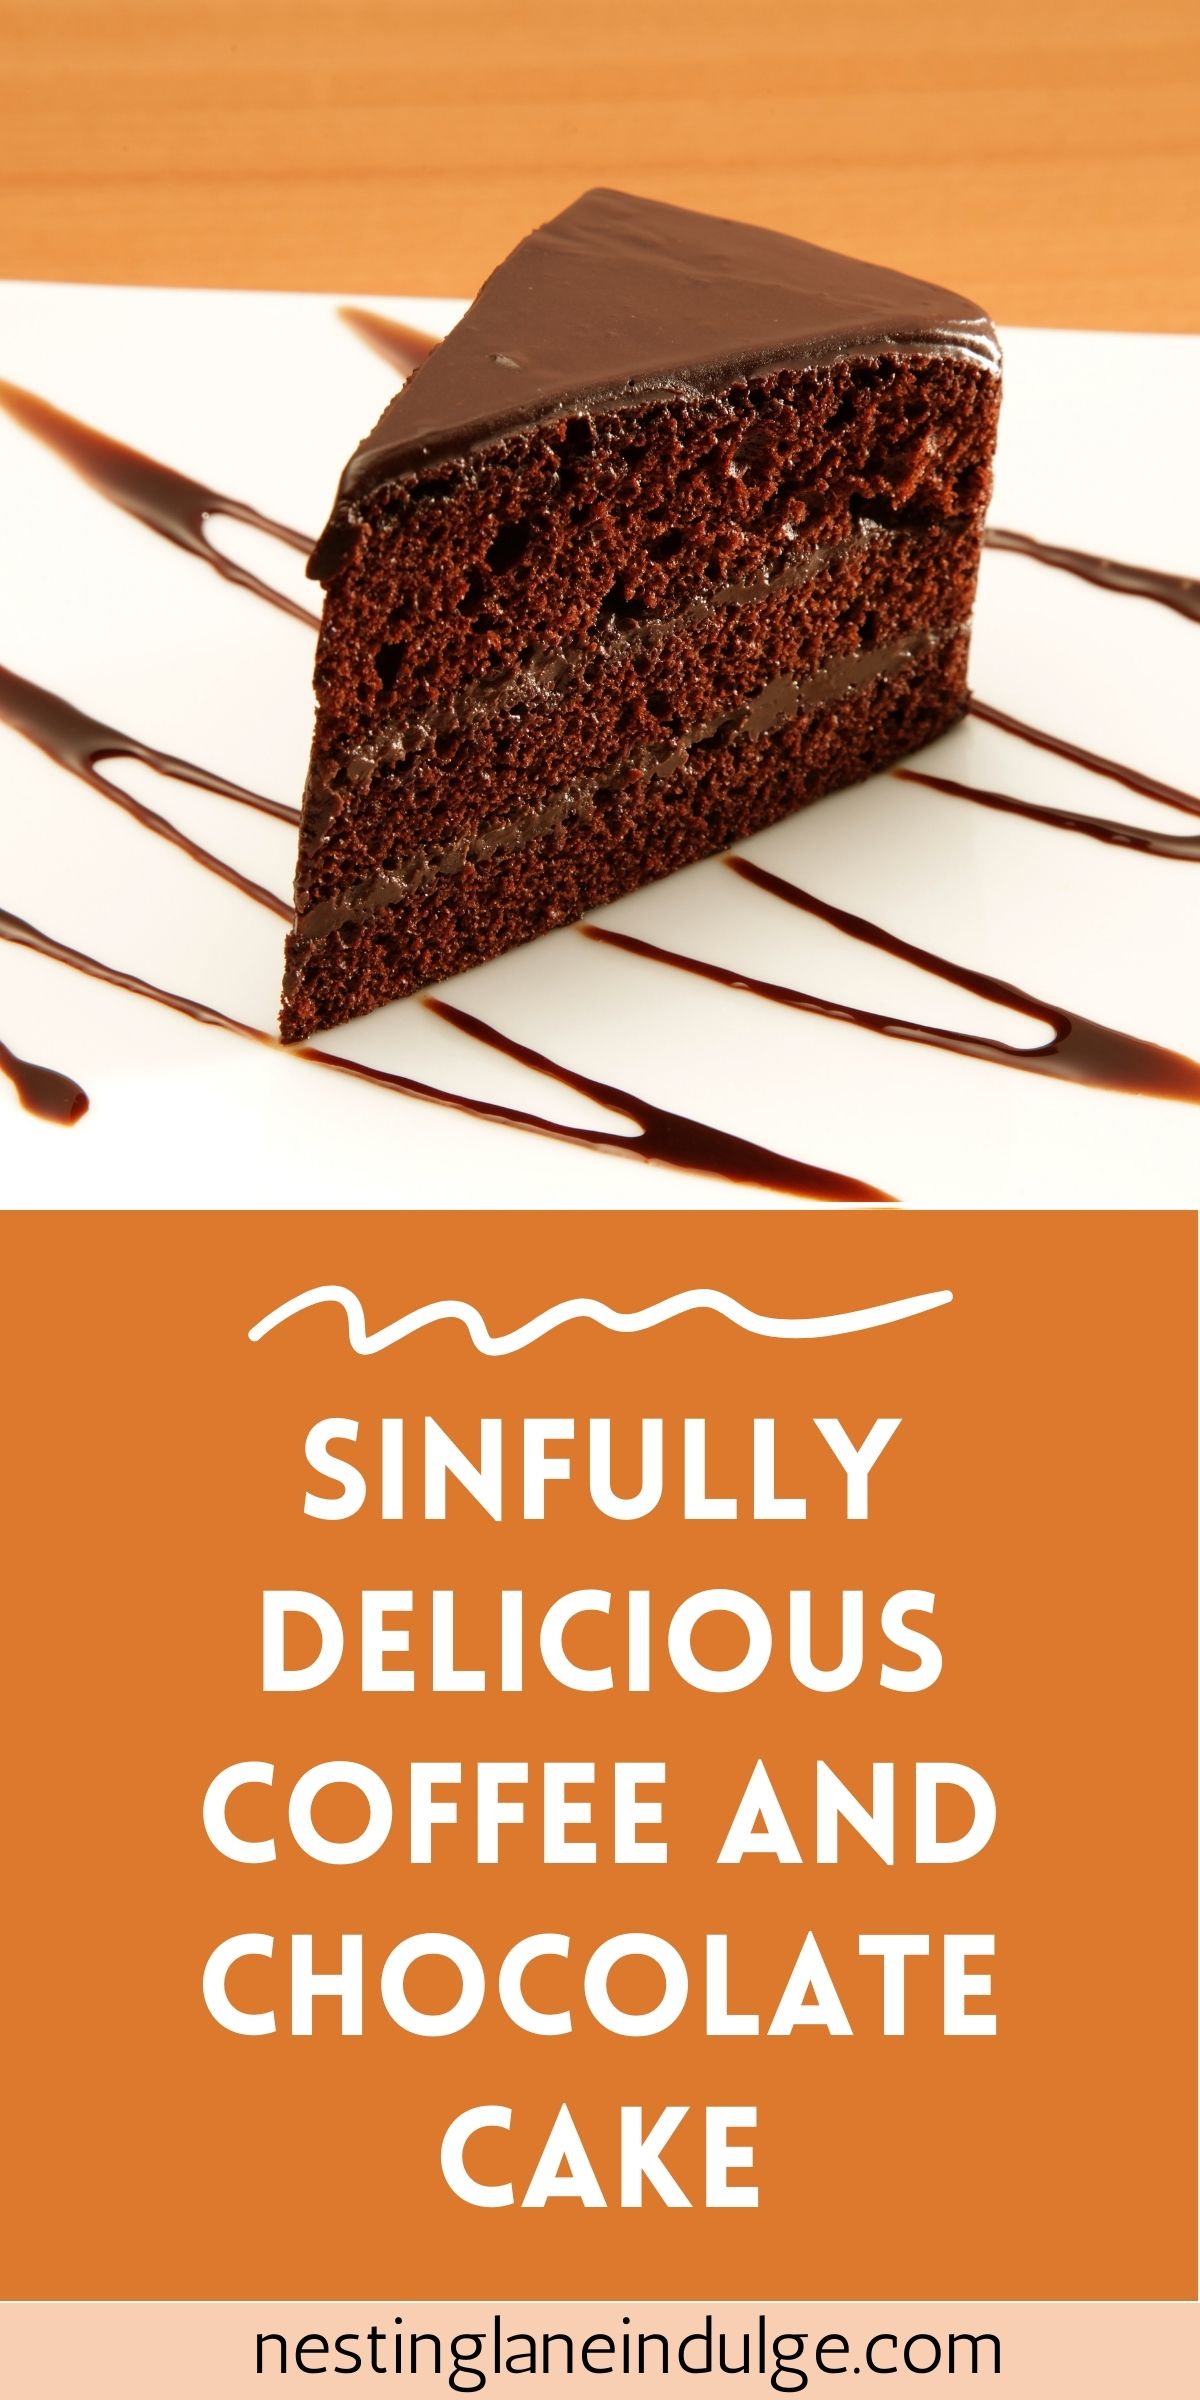 Graphic for Pinterest of Sinfully Delicious Coffee and Chocolate Cake Recipe.